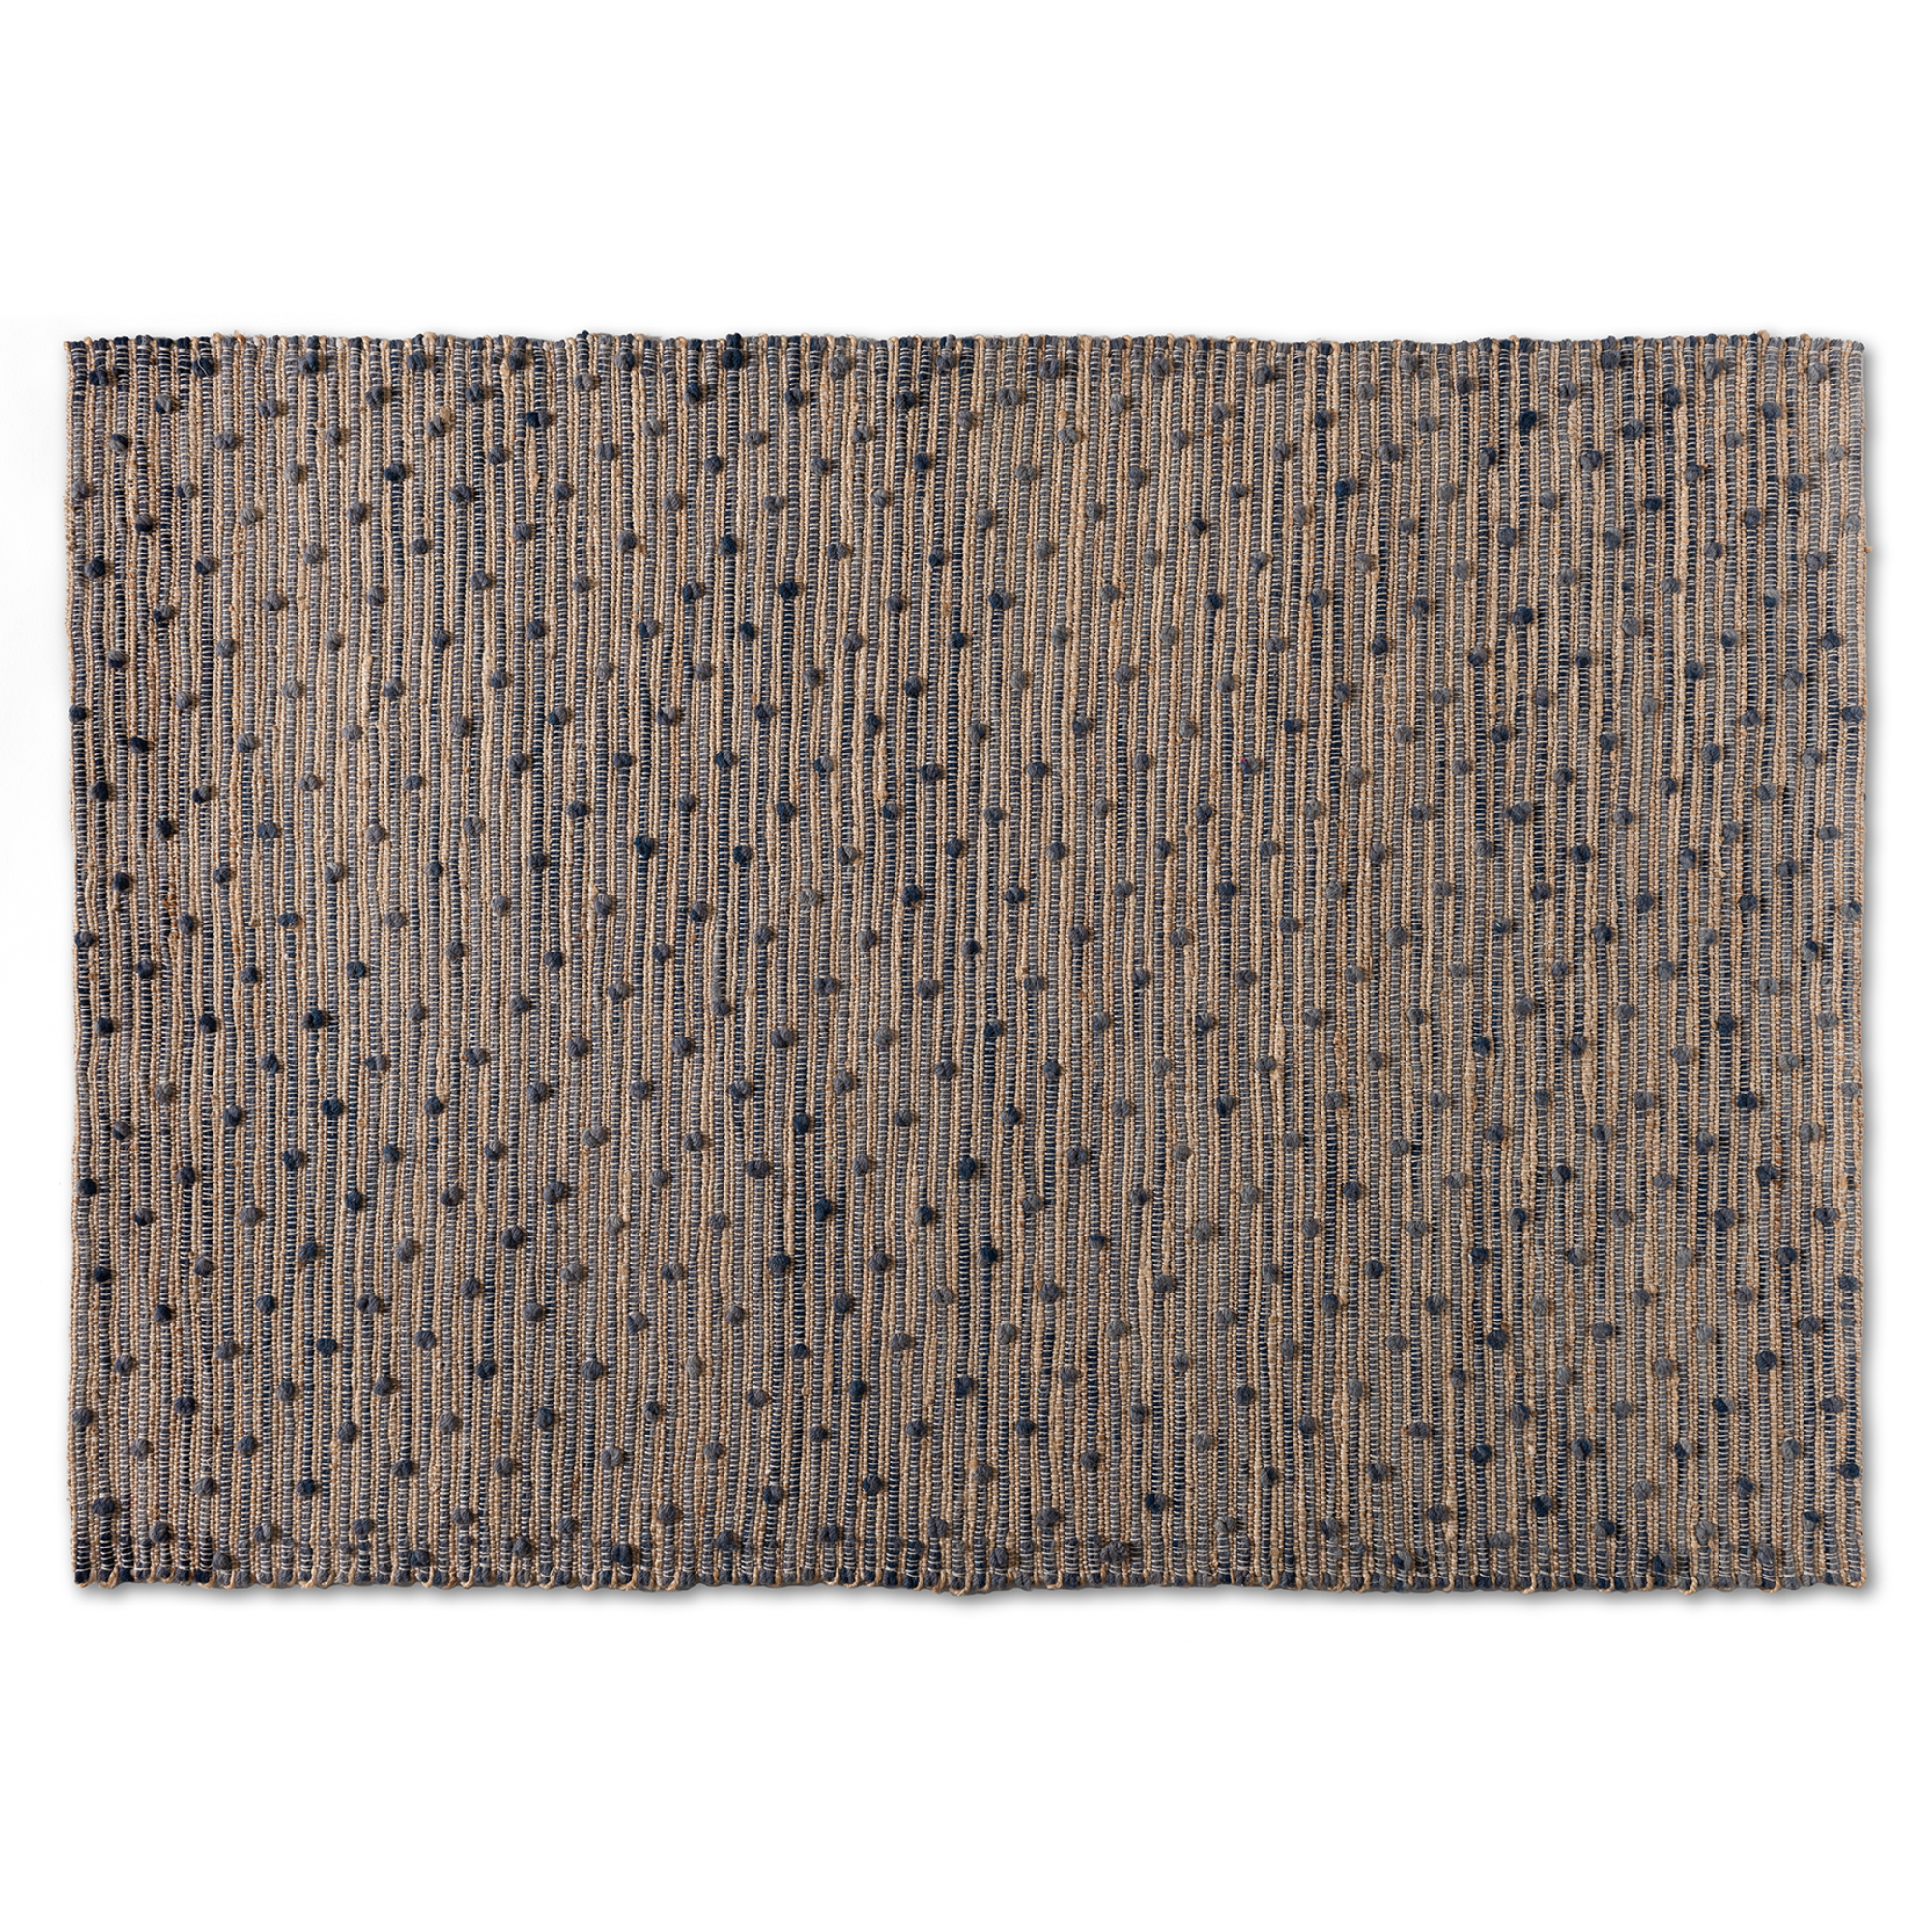 Baxton Studio Berries Modern and Contemporary Natural Brown and Blue Handwoven Jute Blend Area Rug